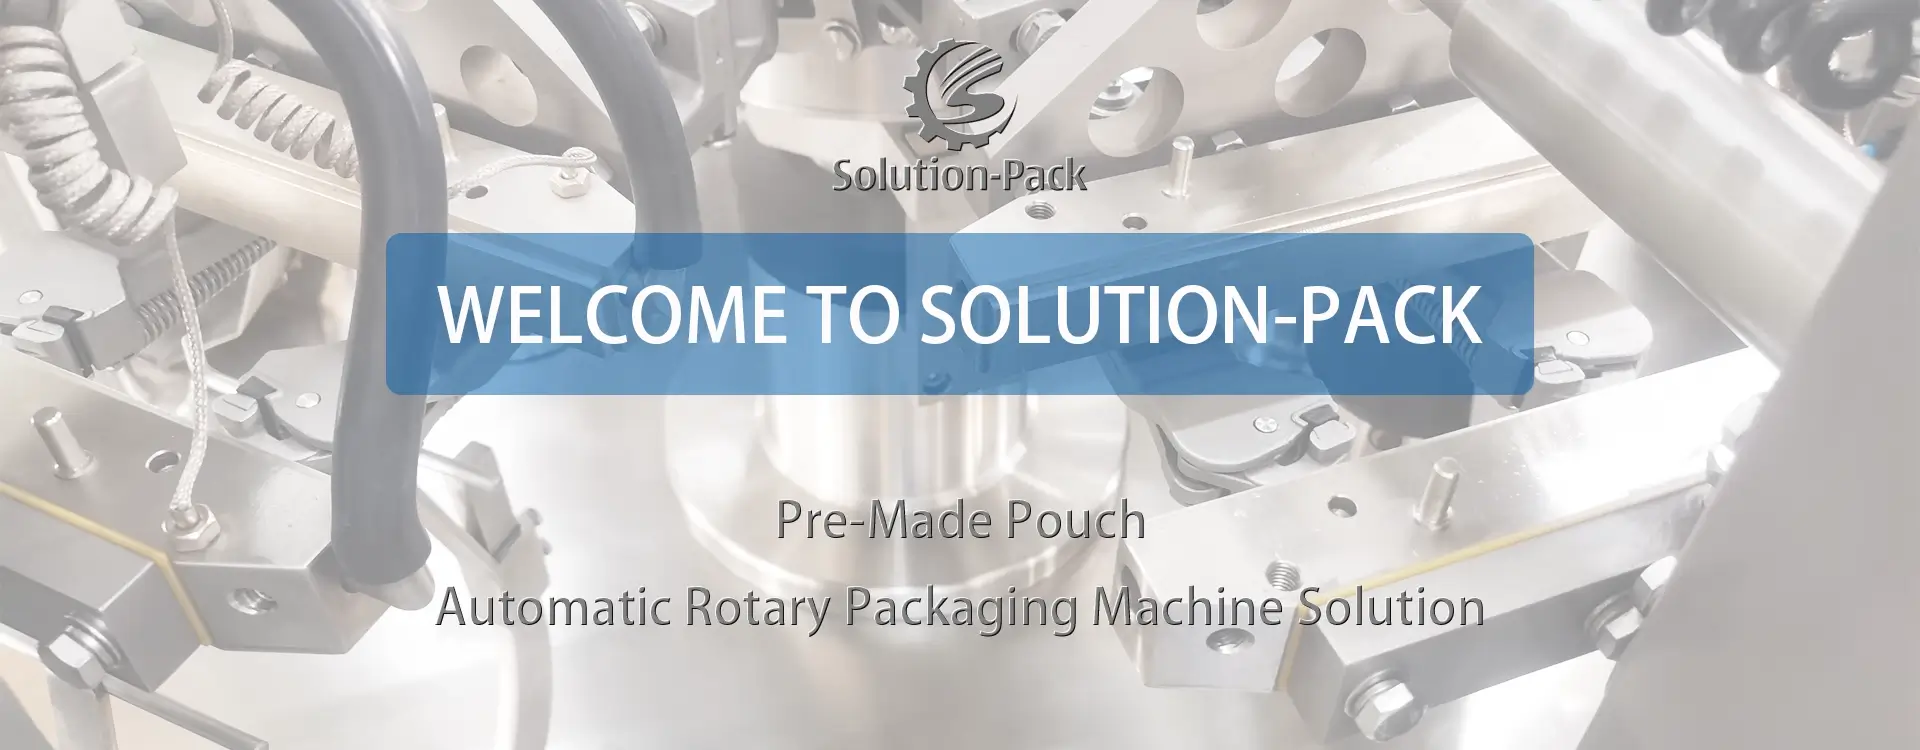 Model SP8-300P Automatic Powder Rotary Packaging Machine Solution Bottom Banner Picture | Solution-Pack